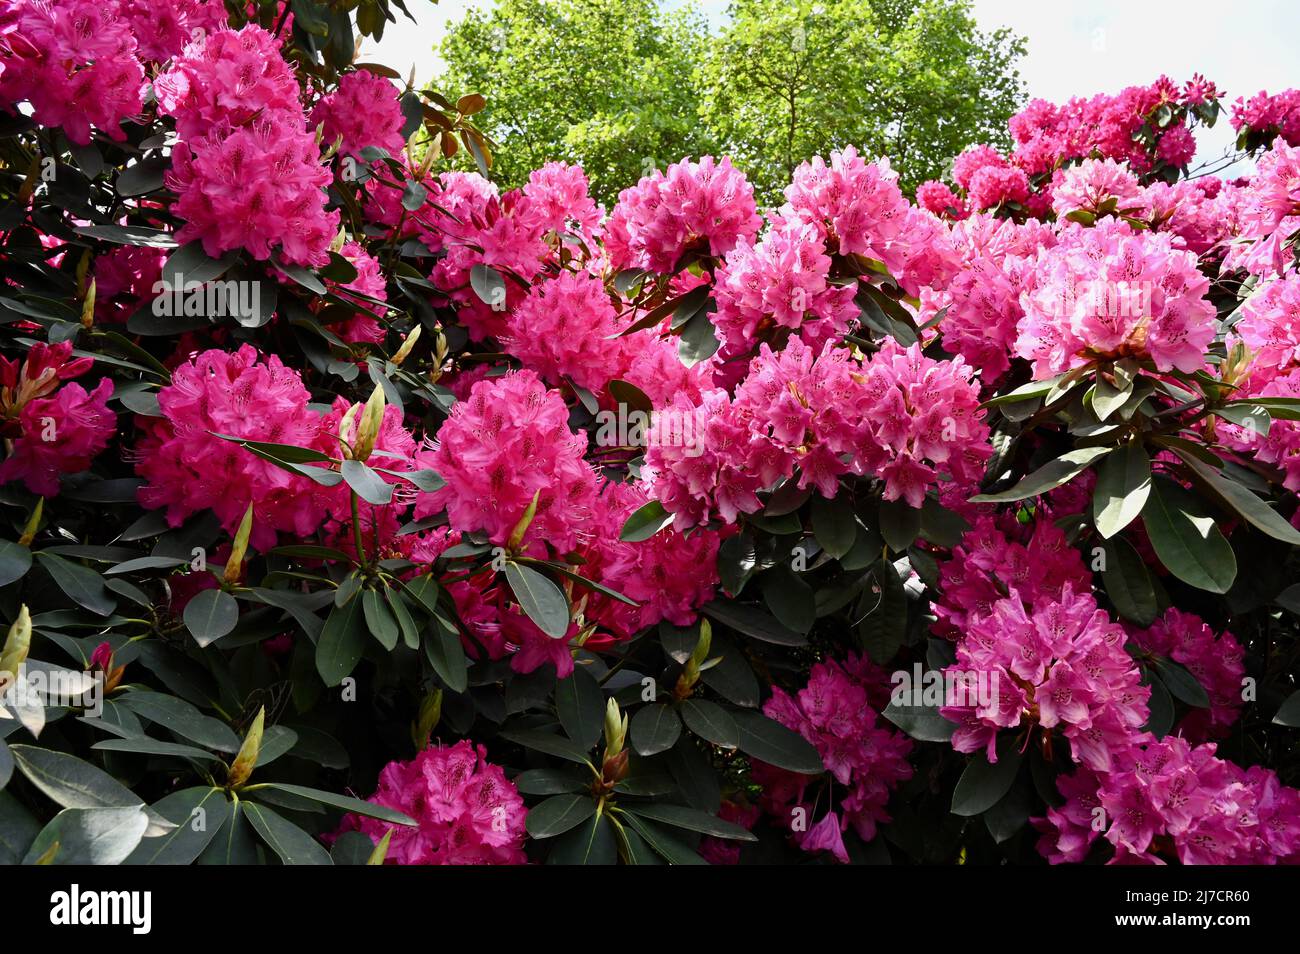 Rhododendrons, Kenwood House, Hampstead Heath, Londres. ROYAUME-UNI Banque D'Images